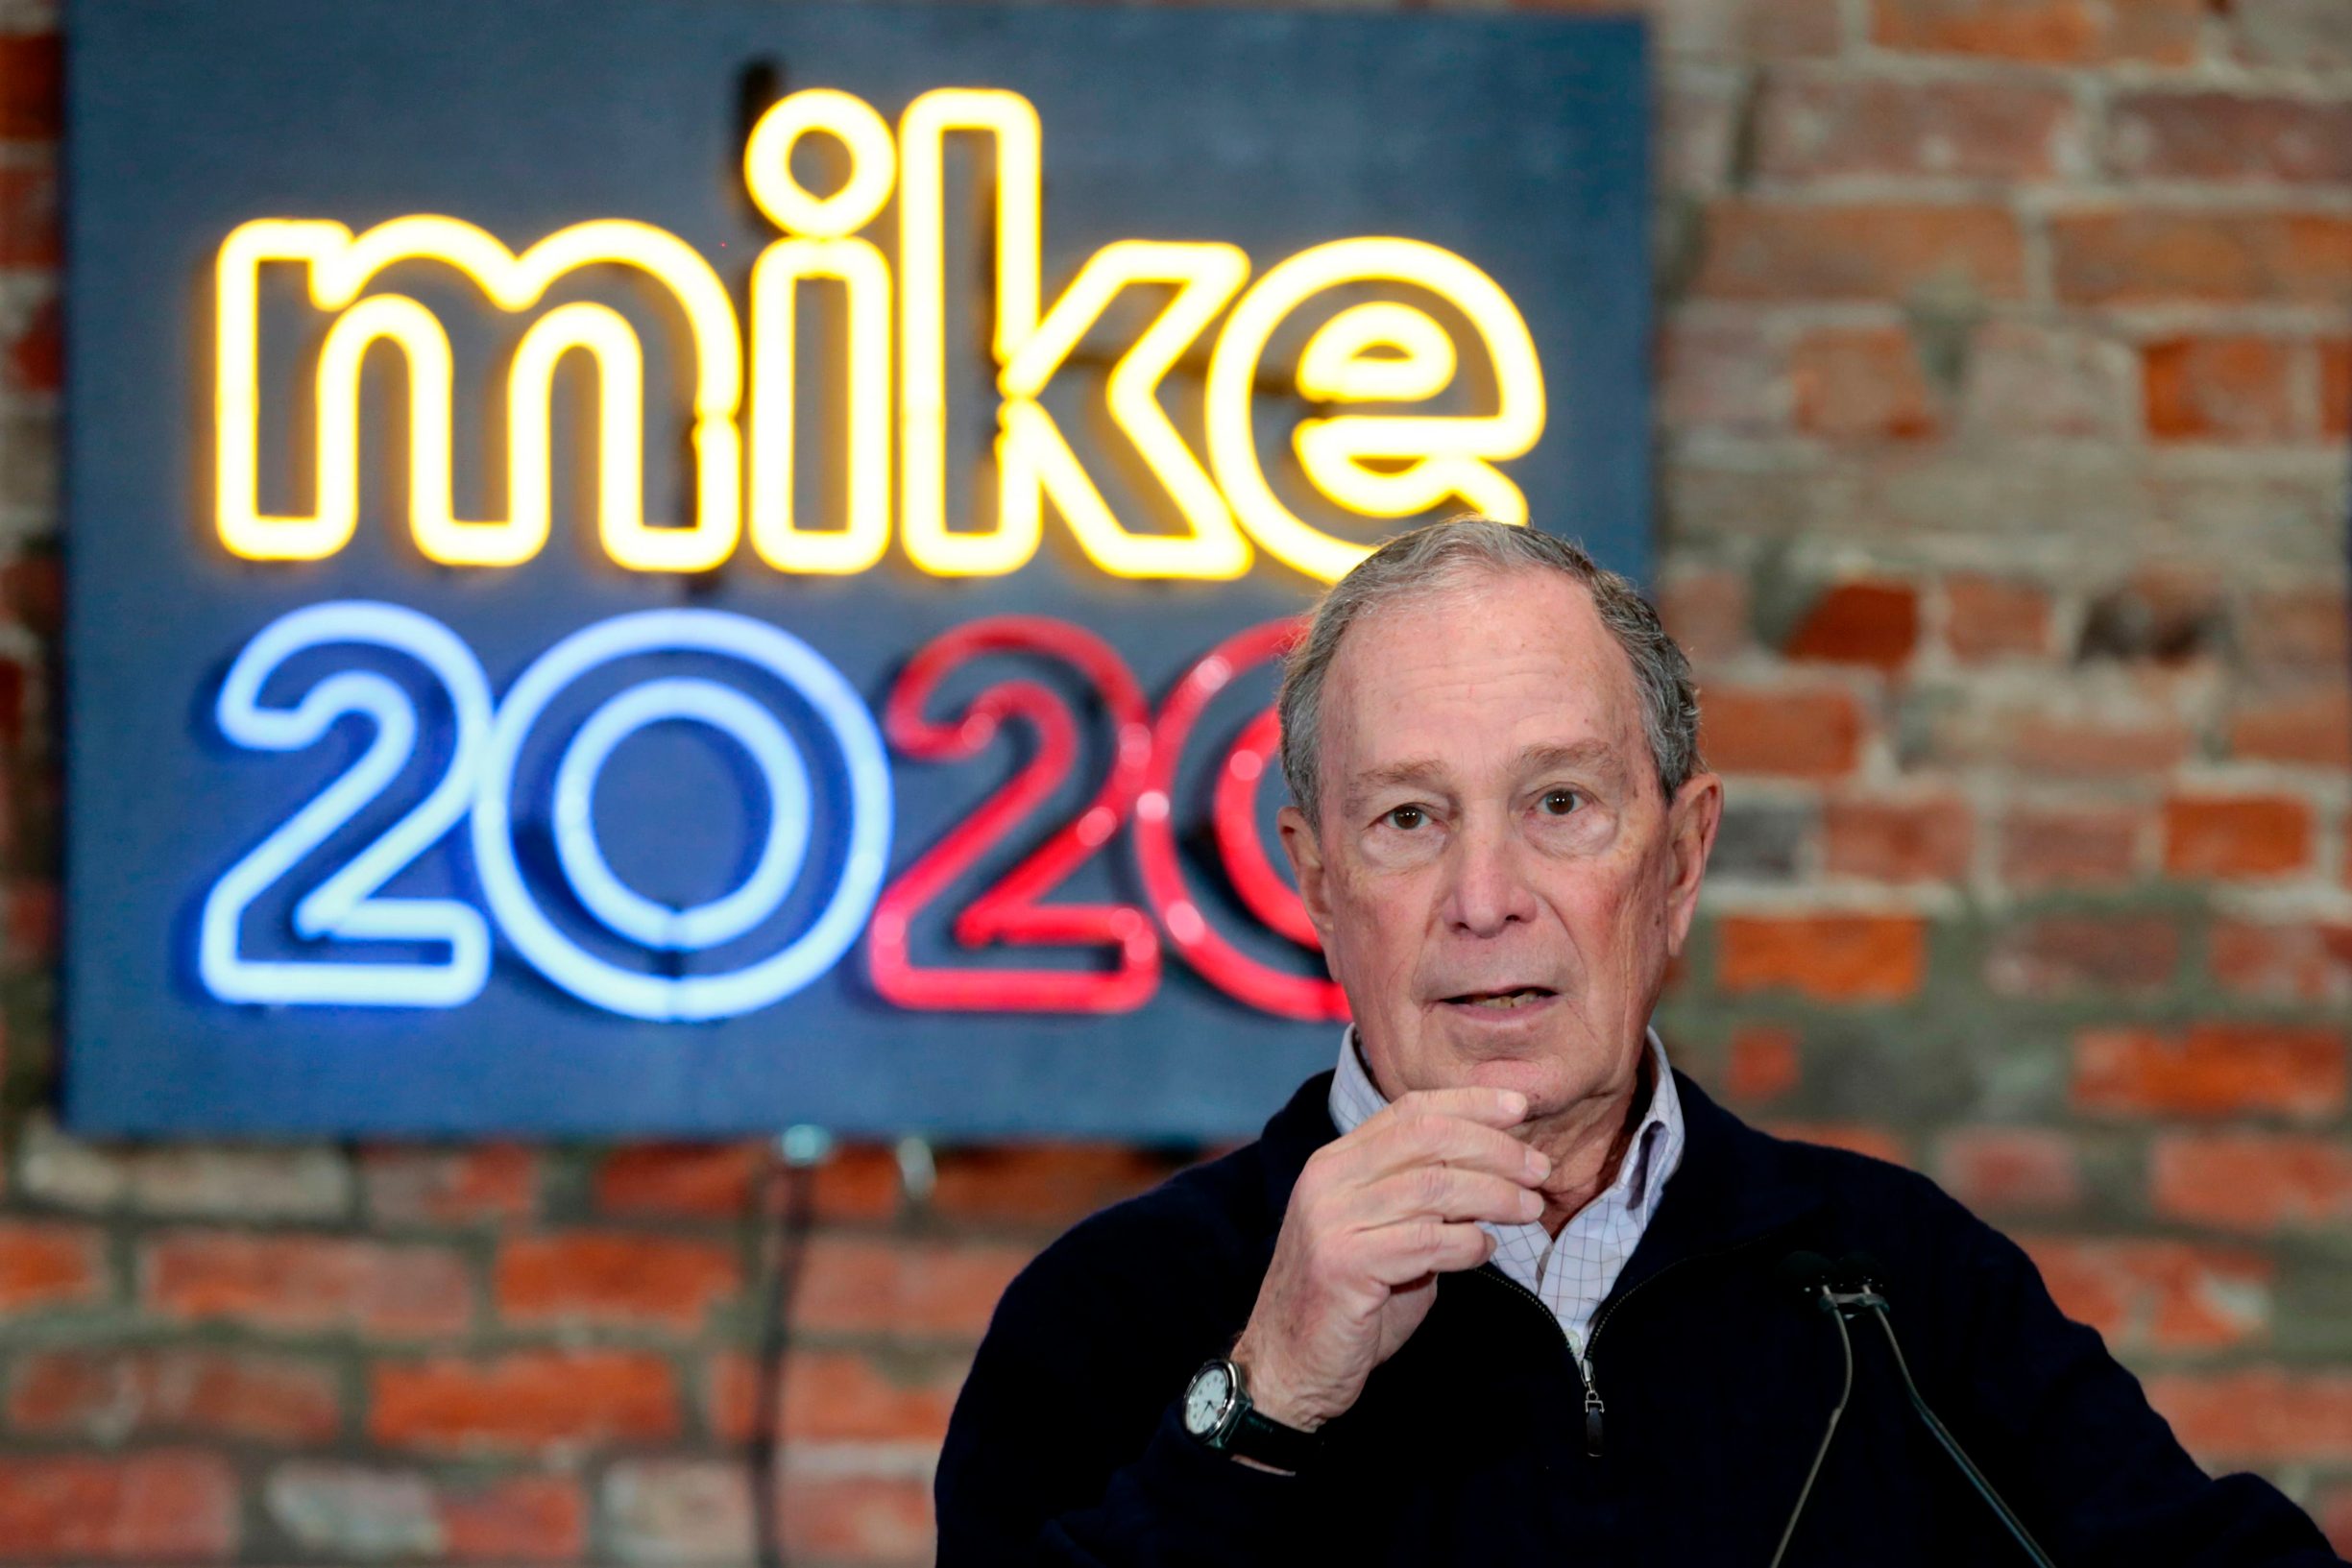 (FILES) In this file photo taken on December 21, 2019 2020 Democratic presidential hopeful and former New York Mayor Michael Bloomberg speaks during an event to open a campaign office at Eastern Market in Detroit, Michigan. - They're flooding the airwaves with campaign ads targeting Donald Trump. They're paying for it with their own money. Billionaires Mike Bloomberg and Tom Steyer have invested hundreds of millions of dollars in their efforts to win the Democratic Party's presidential nomination. And so far, it seems like that strategy is working. (Photo by JEFF KOWALSKY / AFP)